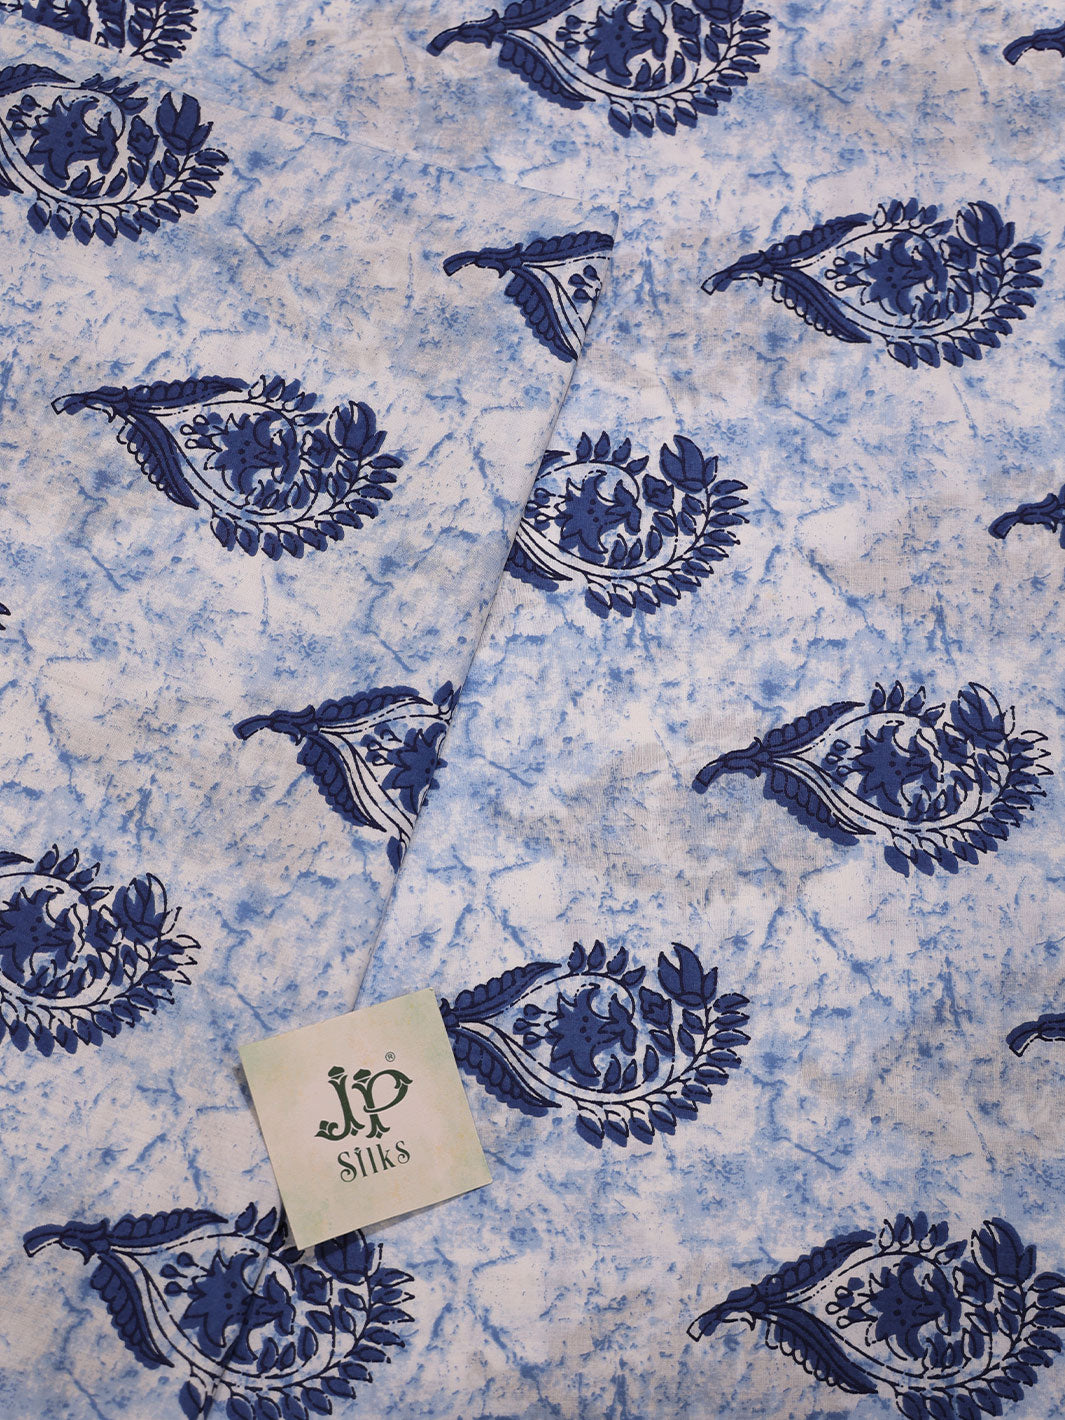 Blue and White Digital Printed Cotton Fabric - D1765 - View 2